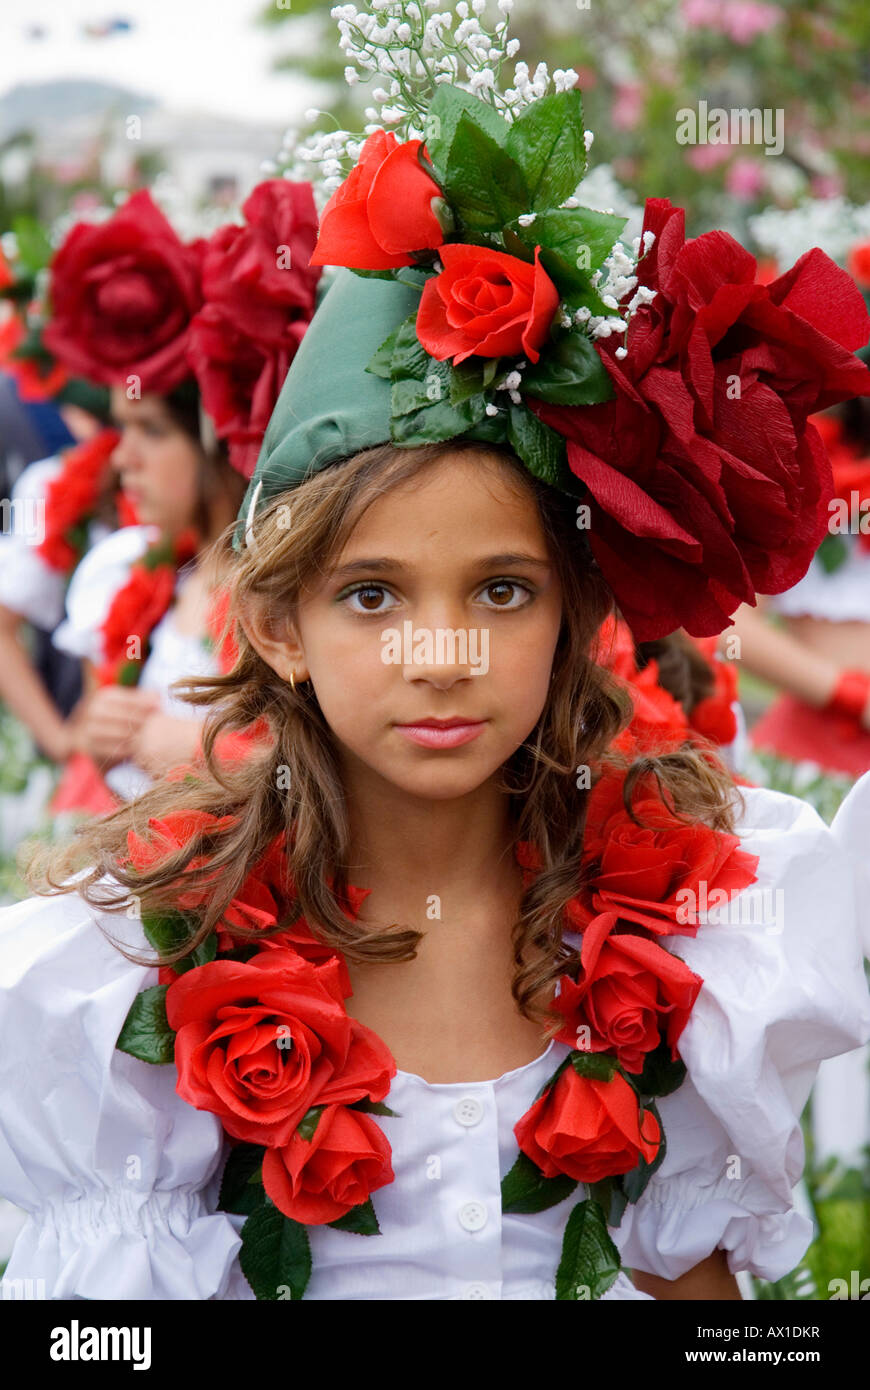 Large procession, April Flower Festival in Funchal, Madeira, Portugal, Europe Stock Photo